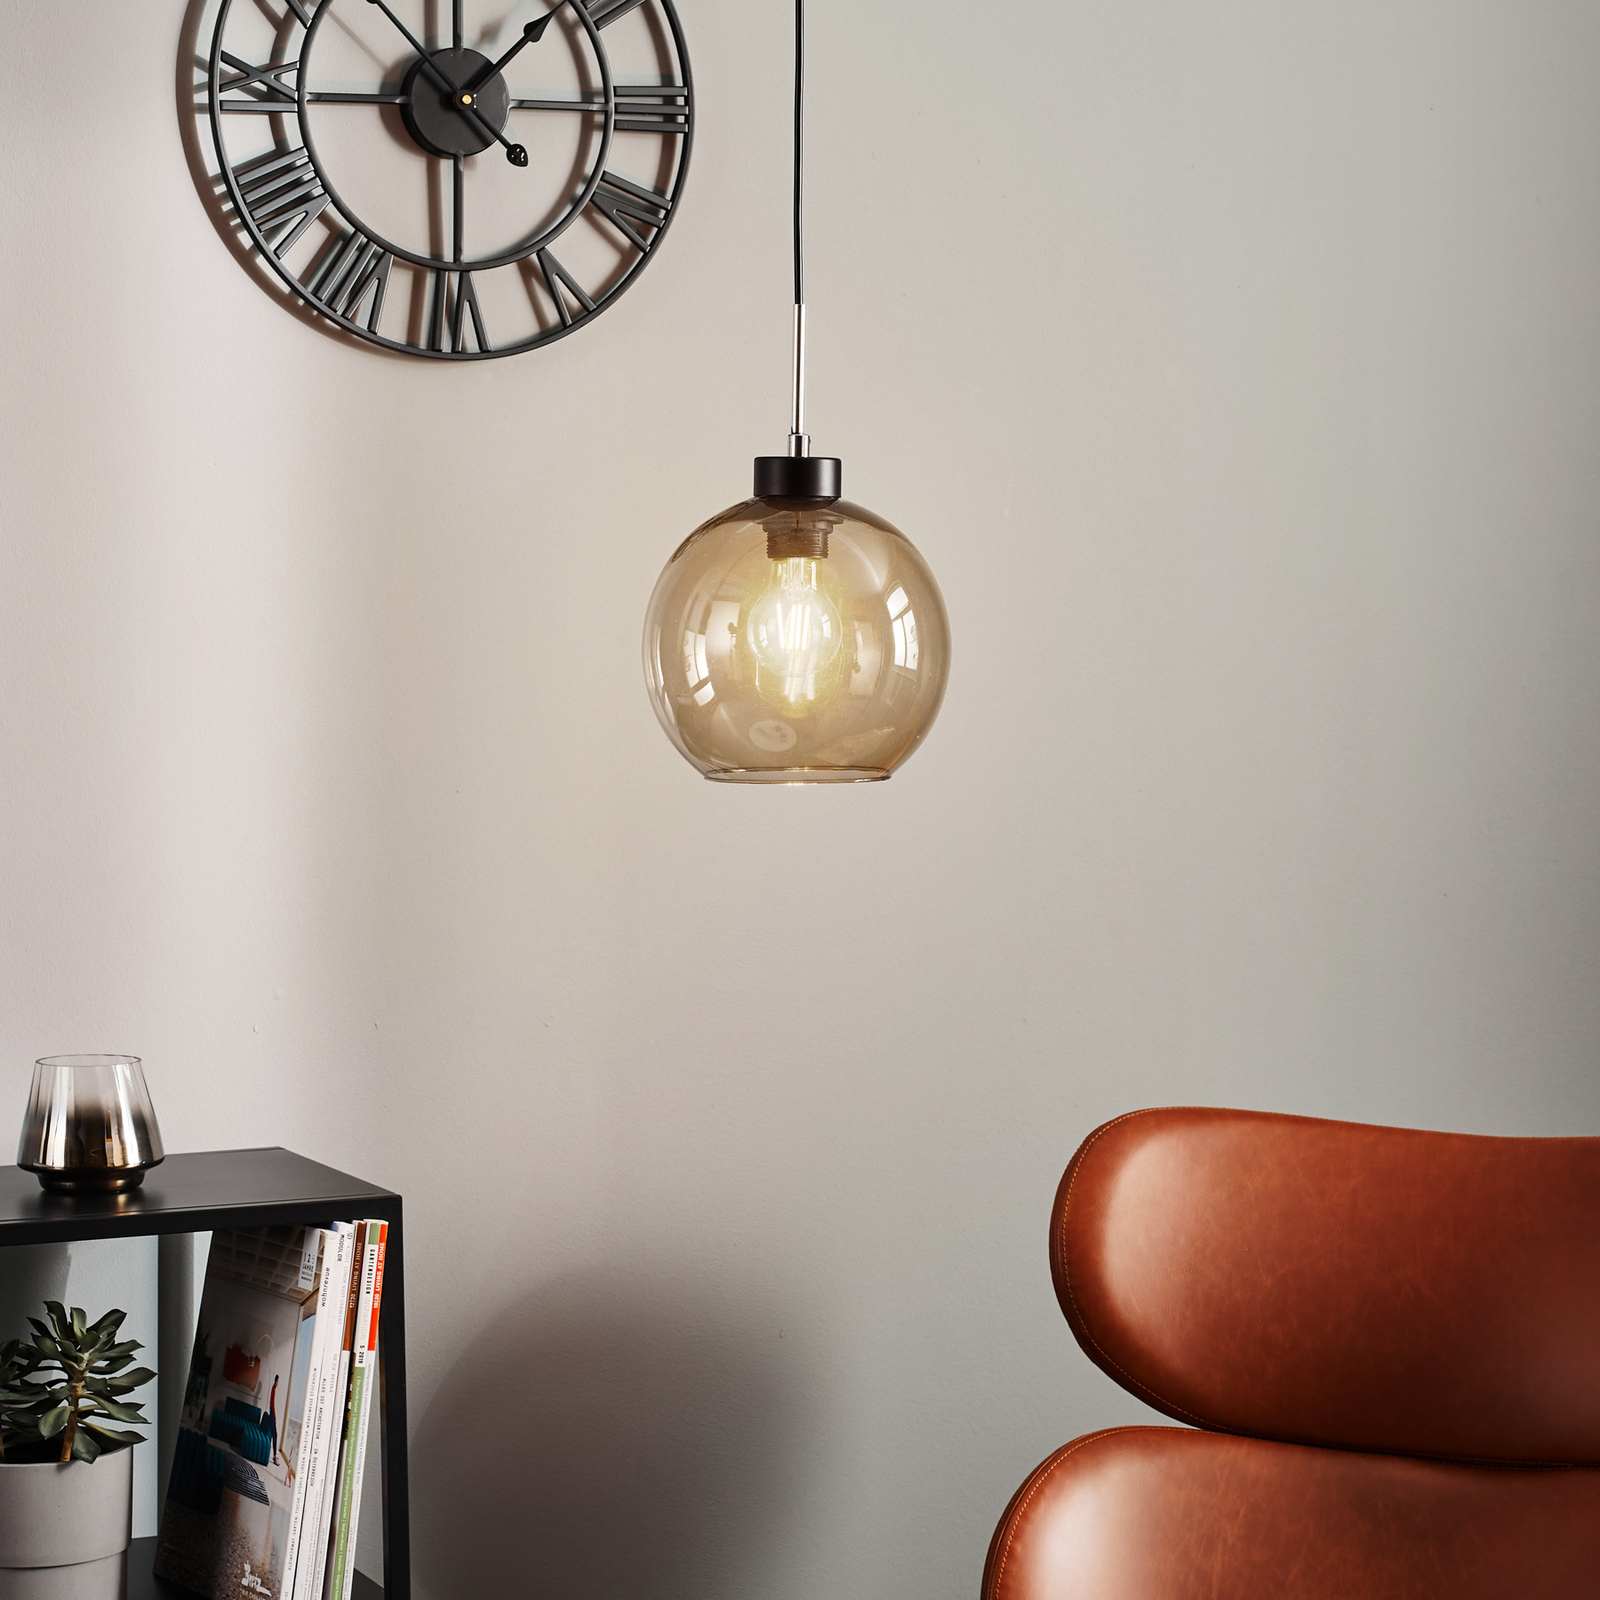 Gota hanging light with smoked glass shade in spherical shape